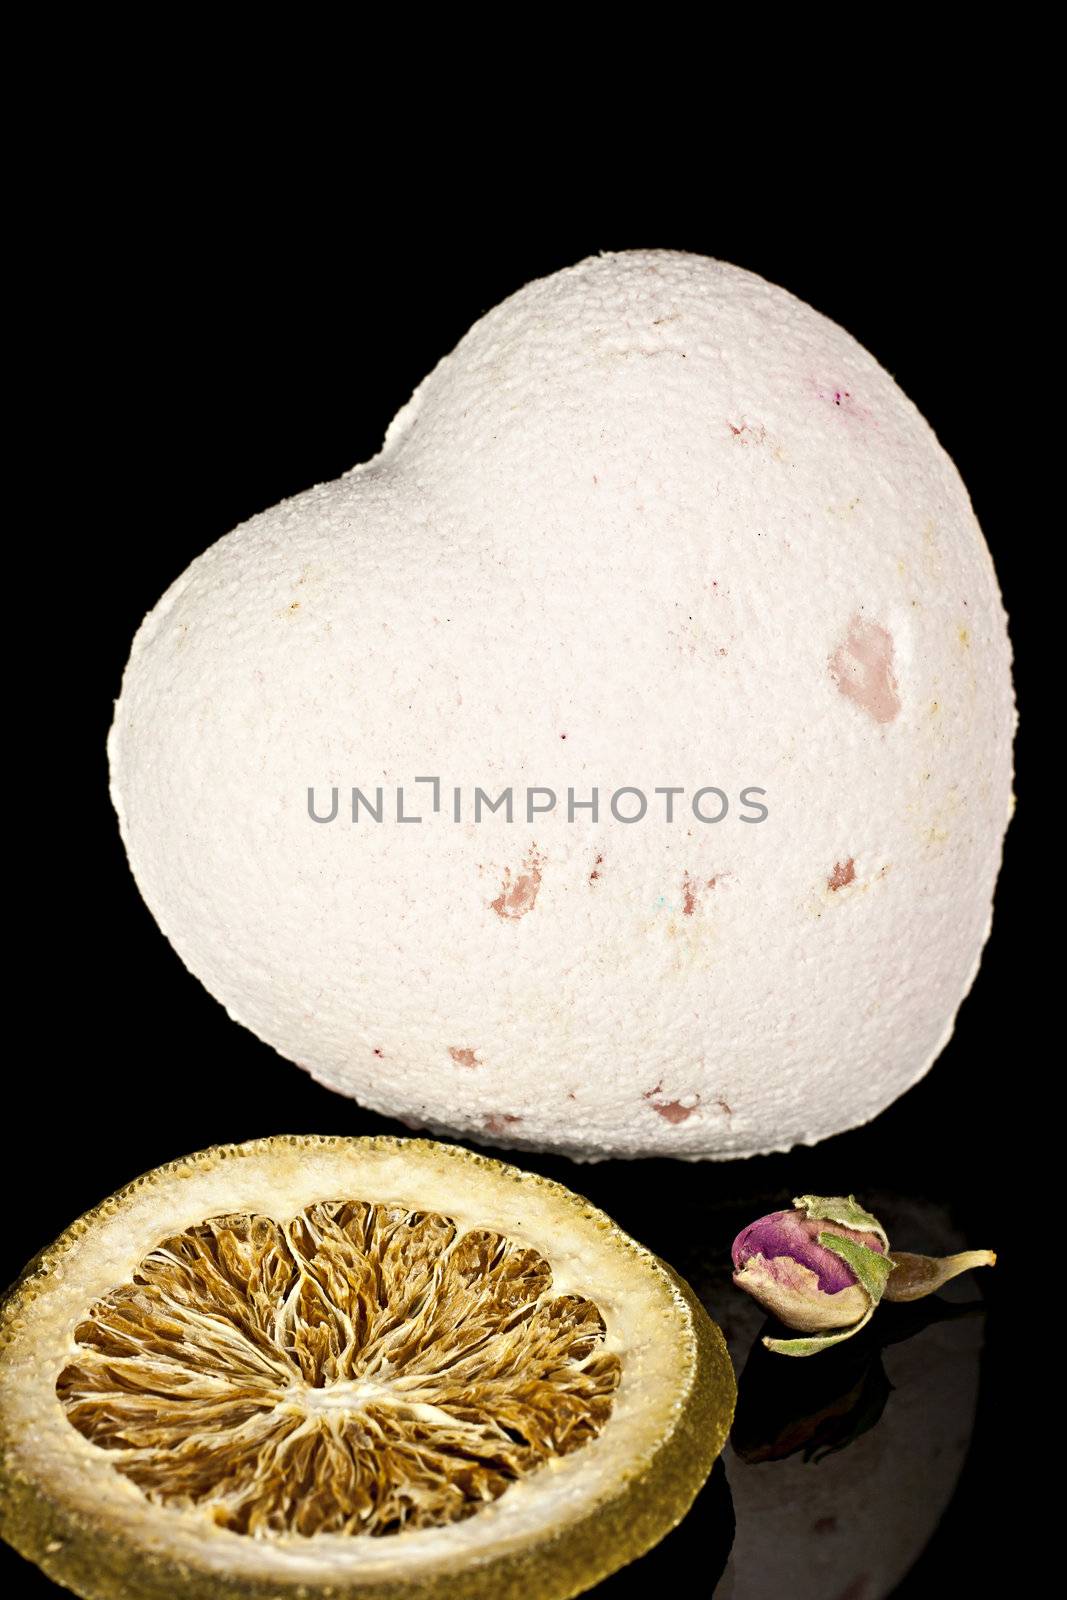 Bath salts in the form of the heart with a dry flowers and the dried slices of lemon on a black background.